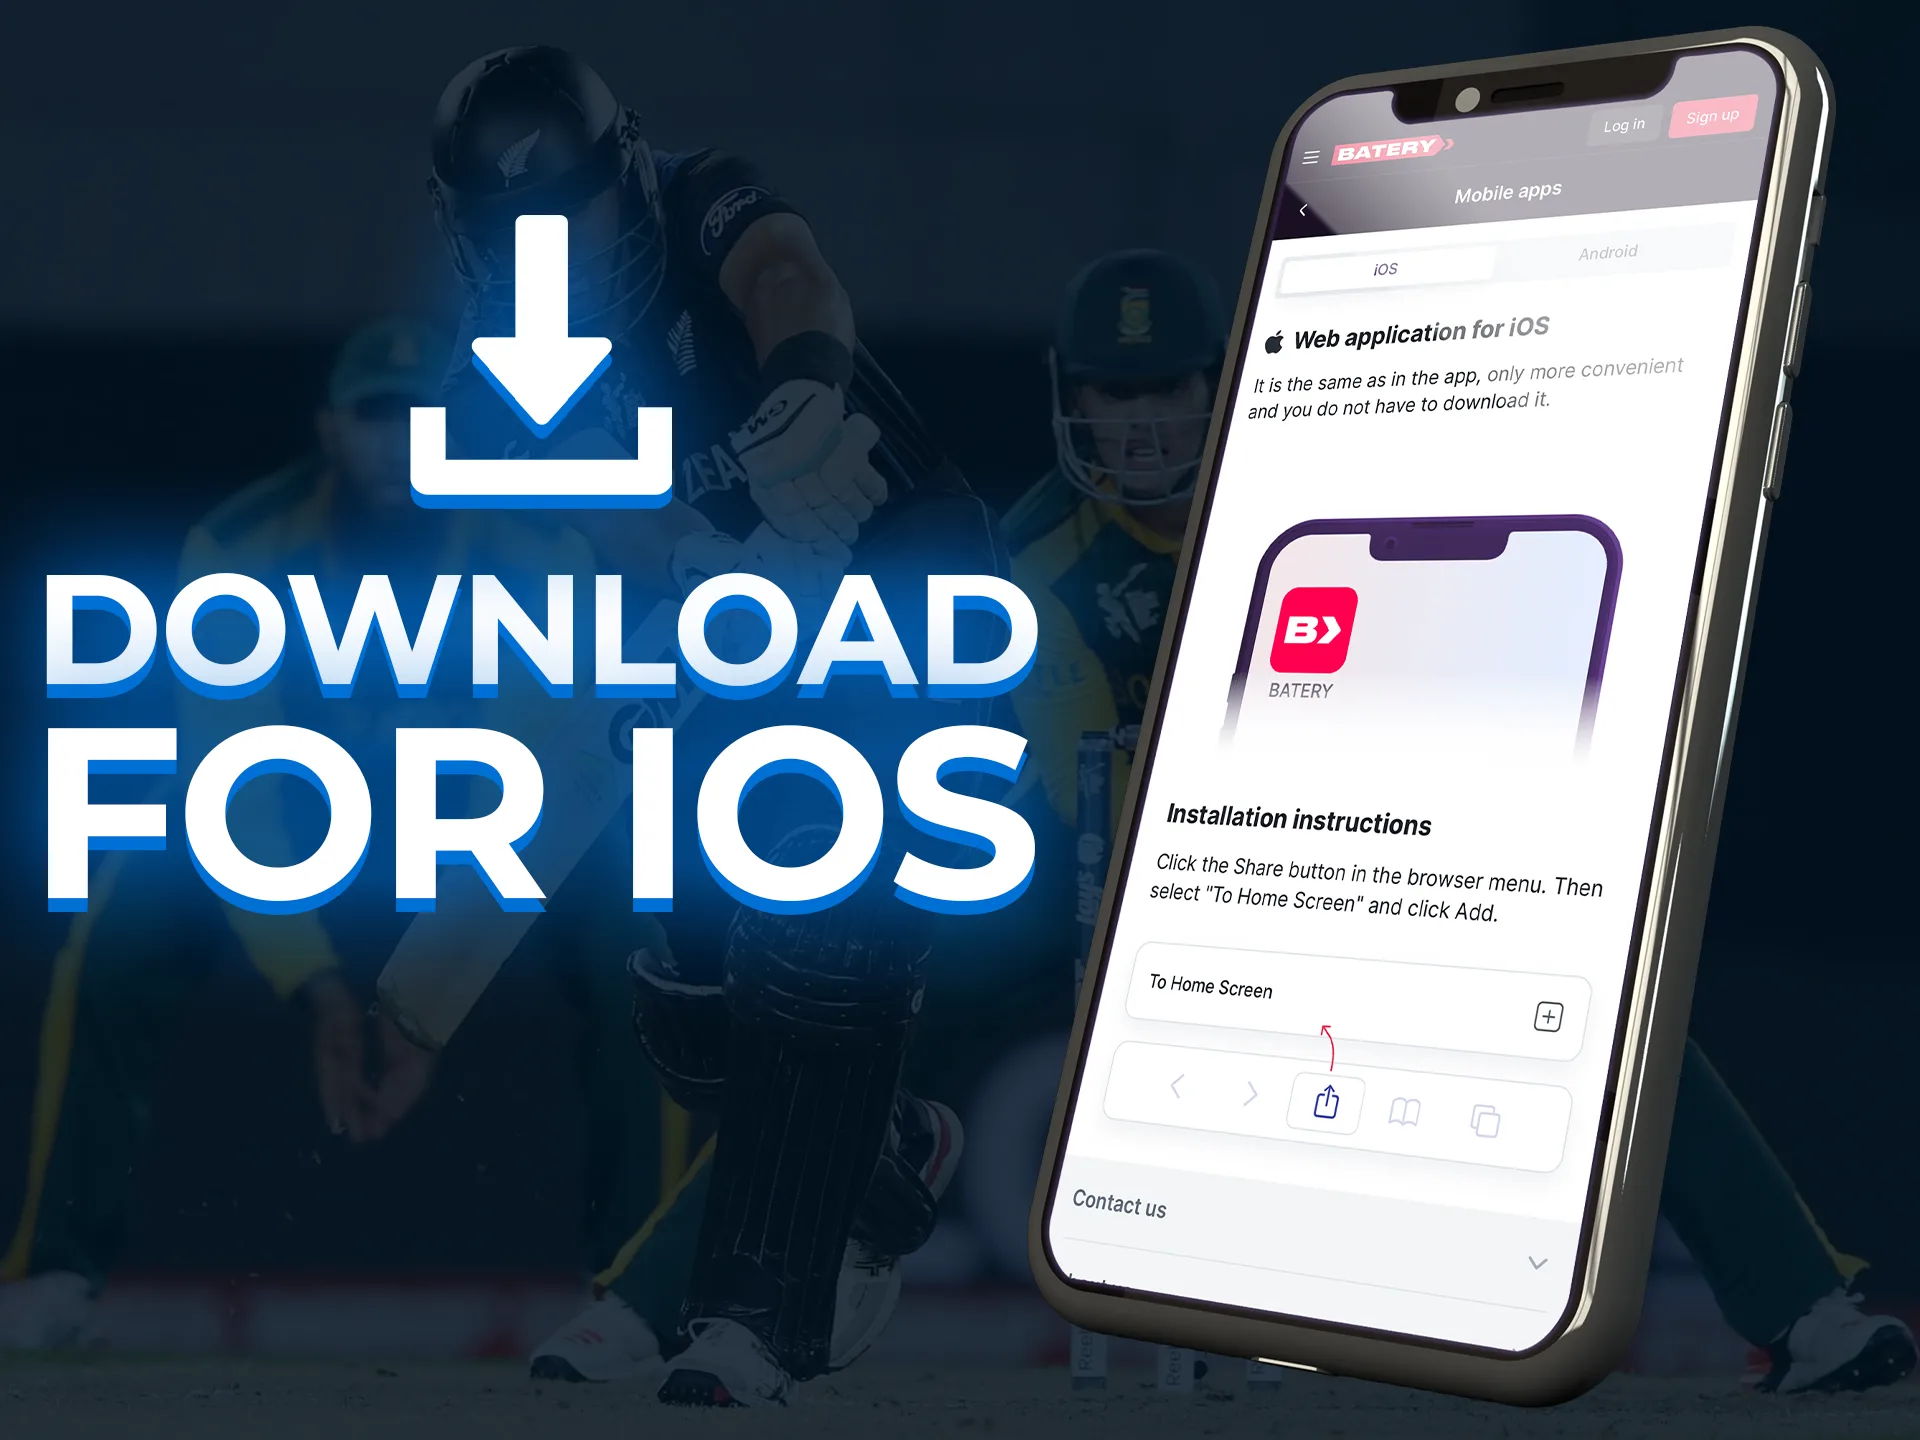 Download cricket betting apps for iOS from the bookmaker's website.